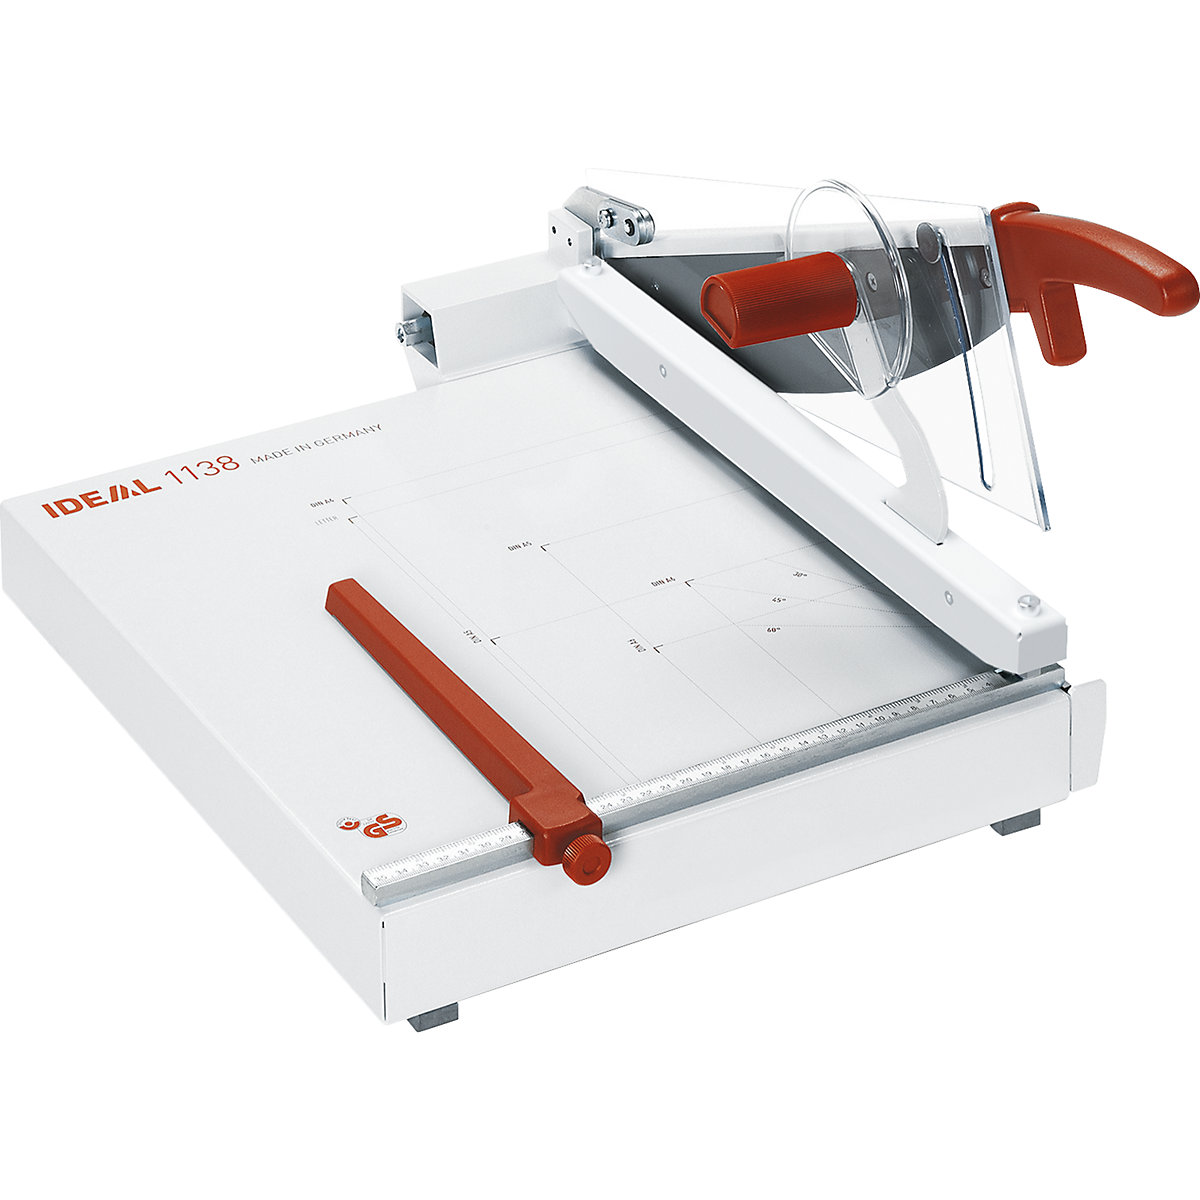 IDEAL 1138 lever guillotine - IDEAL